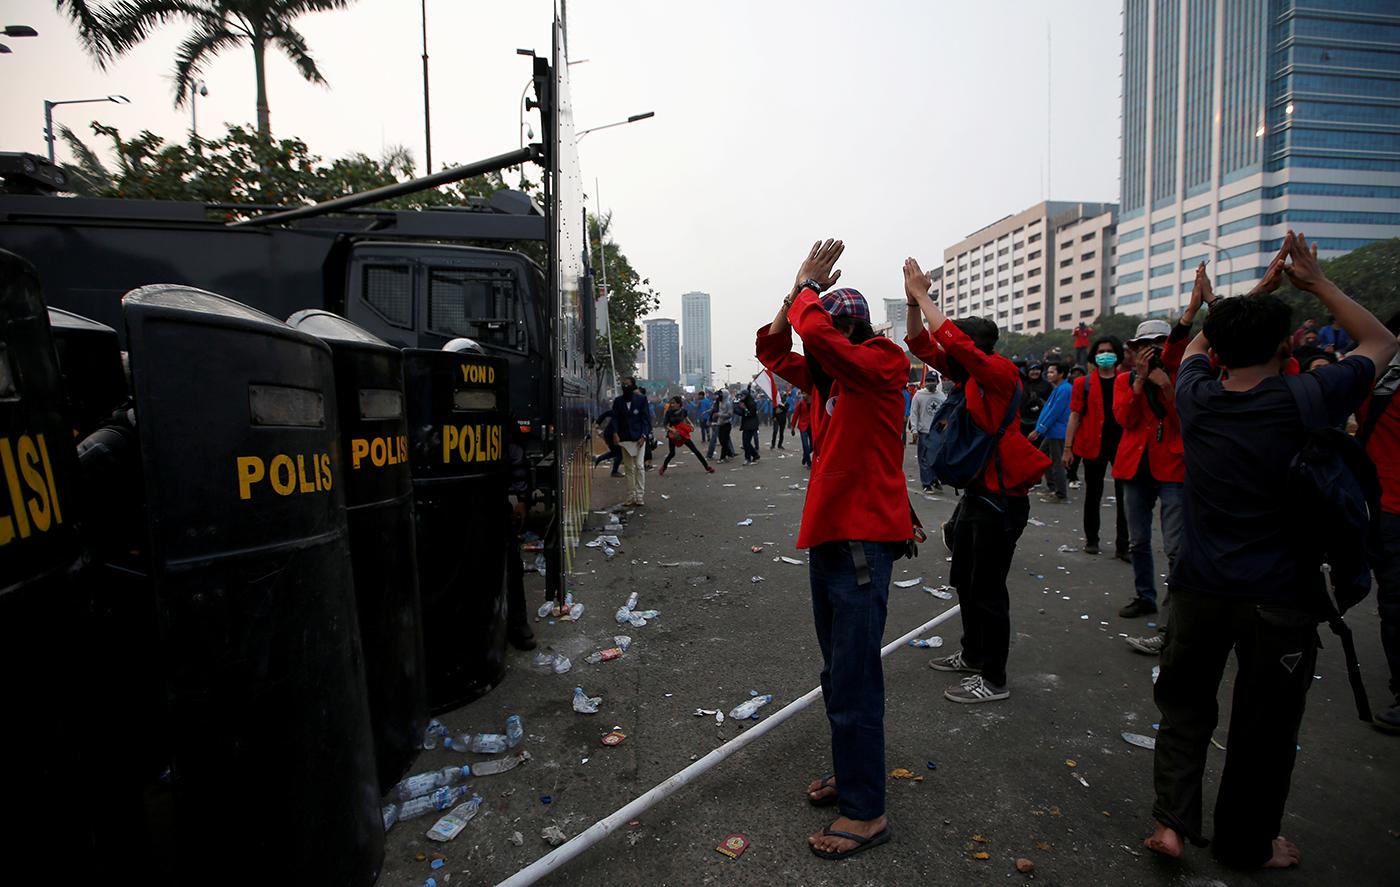 University students gesture in front of police officers during a protest against the draft criminal code in Jakarta, Indonesia, September 24, 2019.